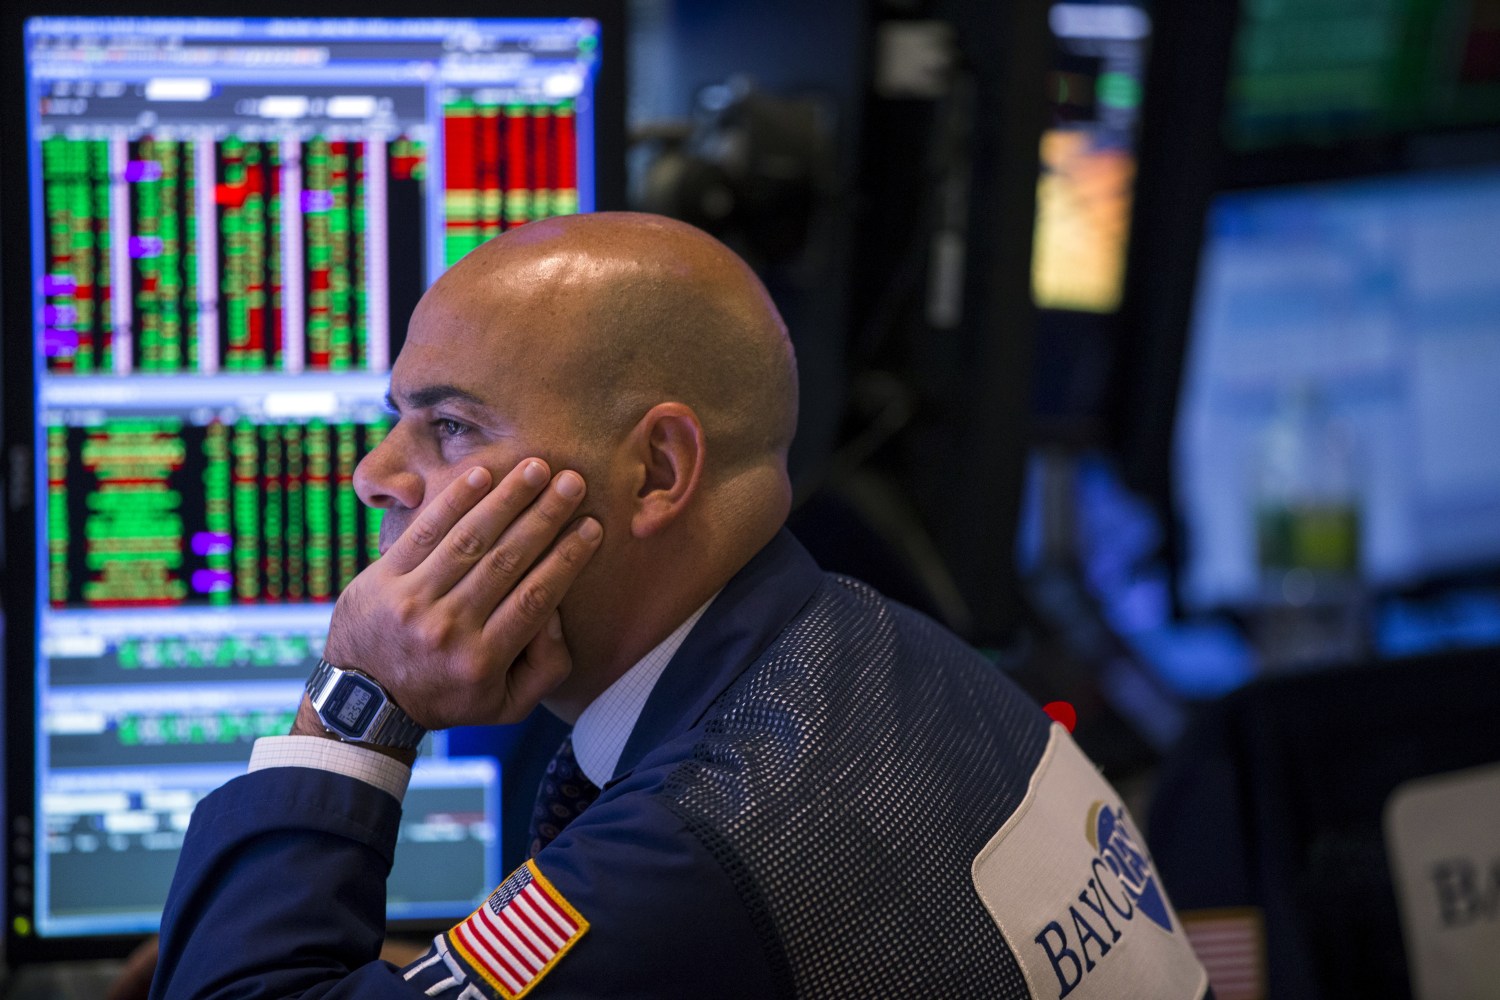 A trader looks at stock prices on a screen while working on the floor of the New York Stock Exchange shortly before the closing bell in New York August 26, 2015. Wall Street was sharply higher on Wednesday while European shares and commodities prices fell as investors balanced strong U.S. economic data and interest rate comments with fears about China's slowing economy.   REUTERS/Lucas Jackson